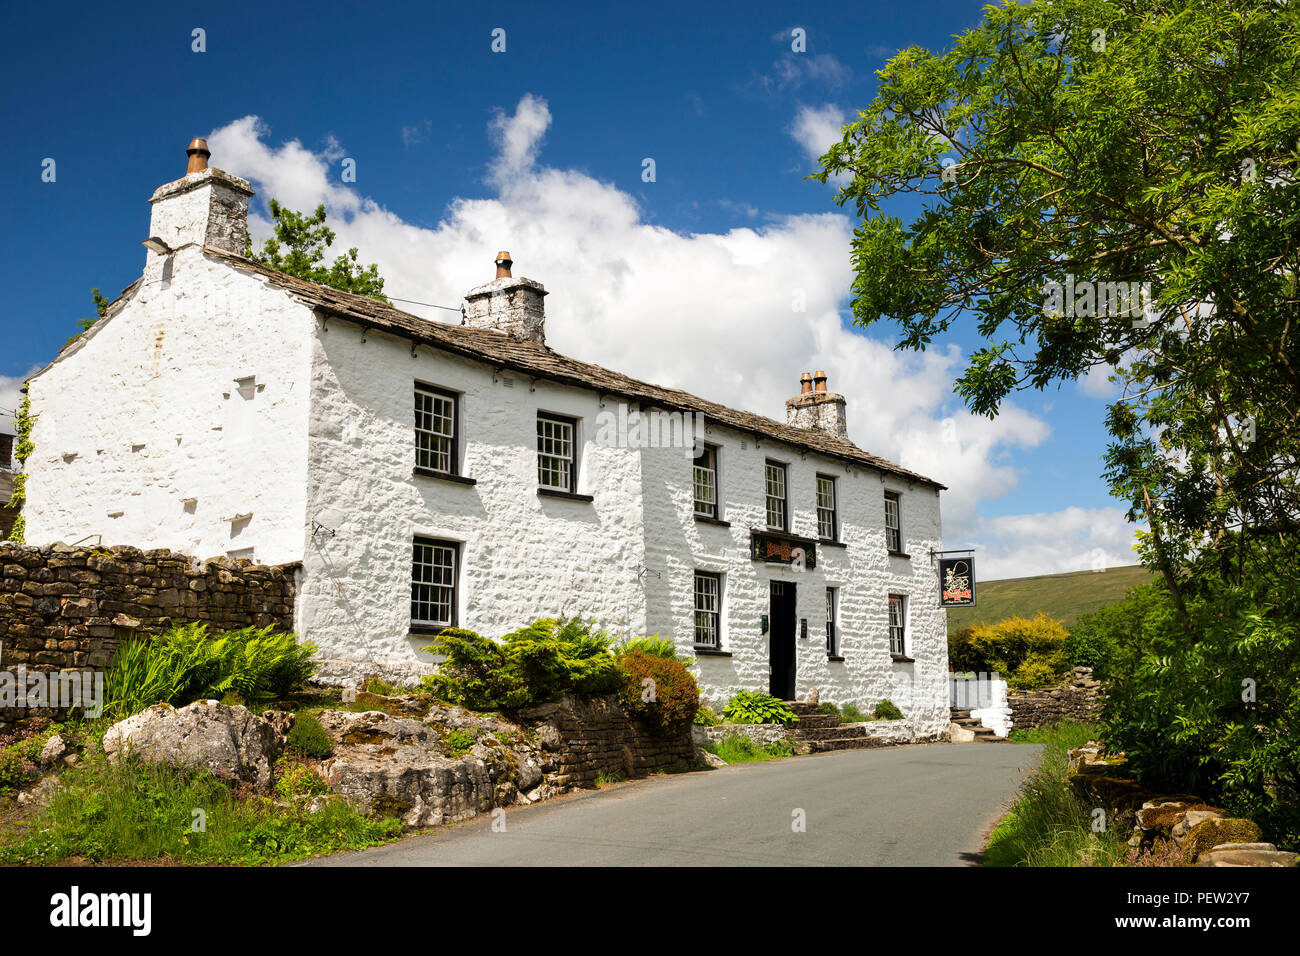 UK, Cumbria, Dentdale, Cowgill, Cow Dub, Sportsman’s Inn, whitewashed country public house Stock Photo